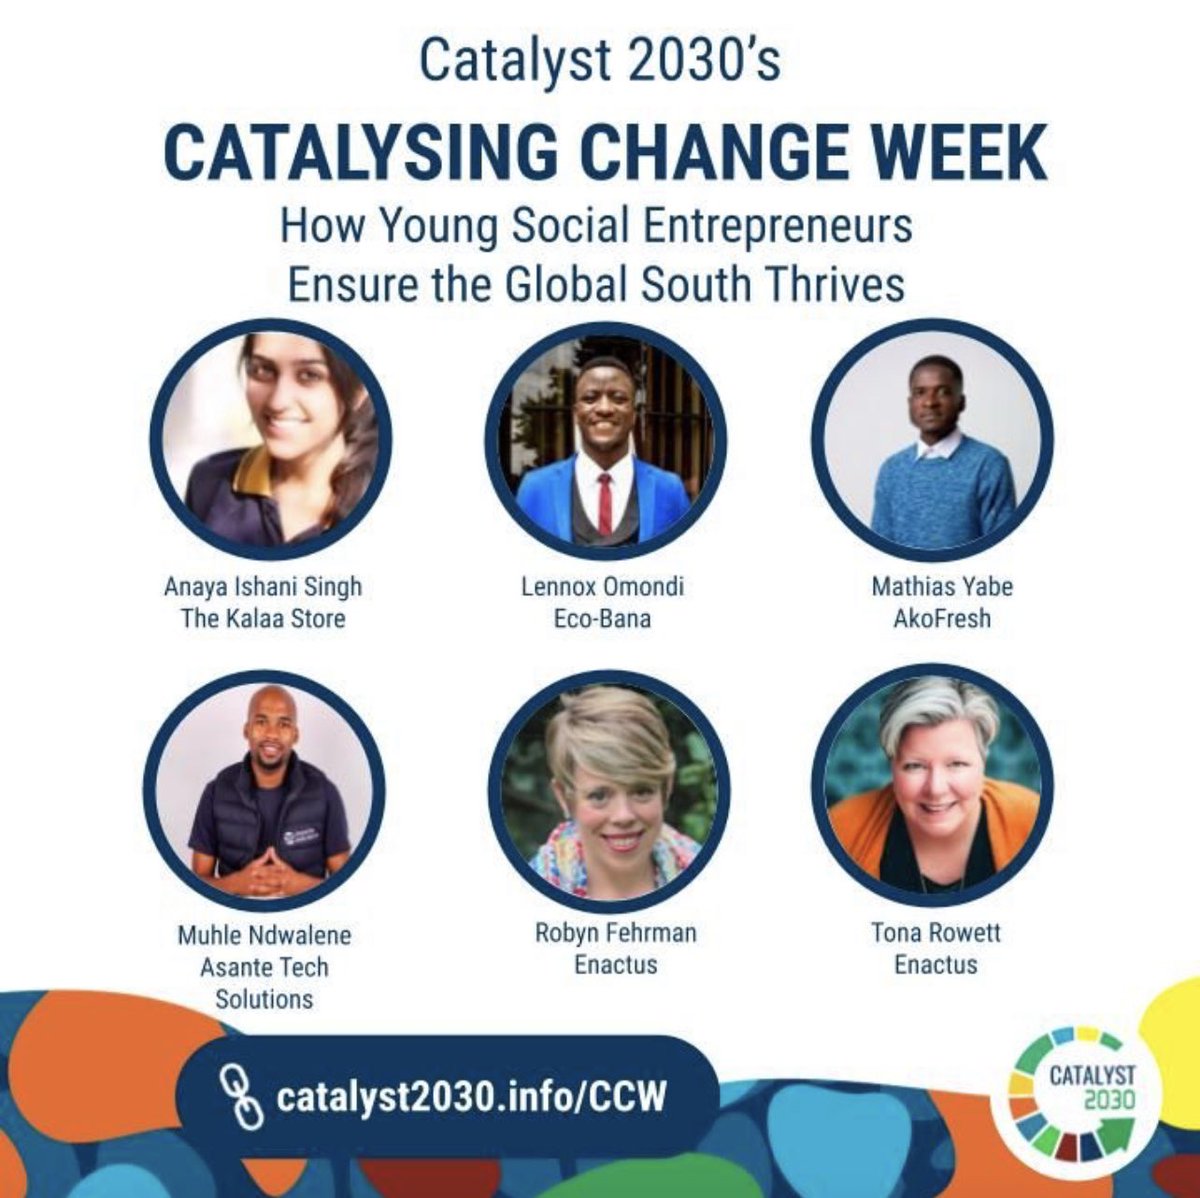 Join me at the #CatalysingChangeWeek2023! 

Excited to be speaking with @enactus CEO Robyn Schryer Fehrman on a panel discussion about how young social entrepreneurs ensure the global south thrive

Date: 1 May (12:30 pm GMT / 2:30 pm CET )

Register: lnkd.in/gHwQFHAH